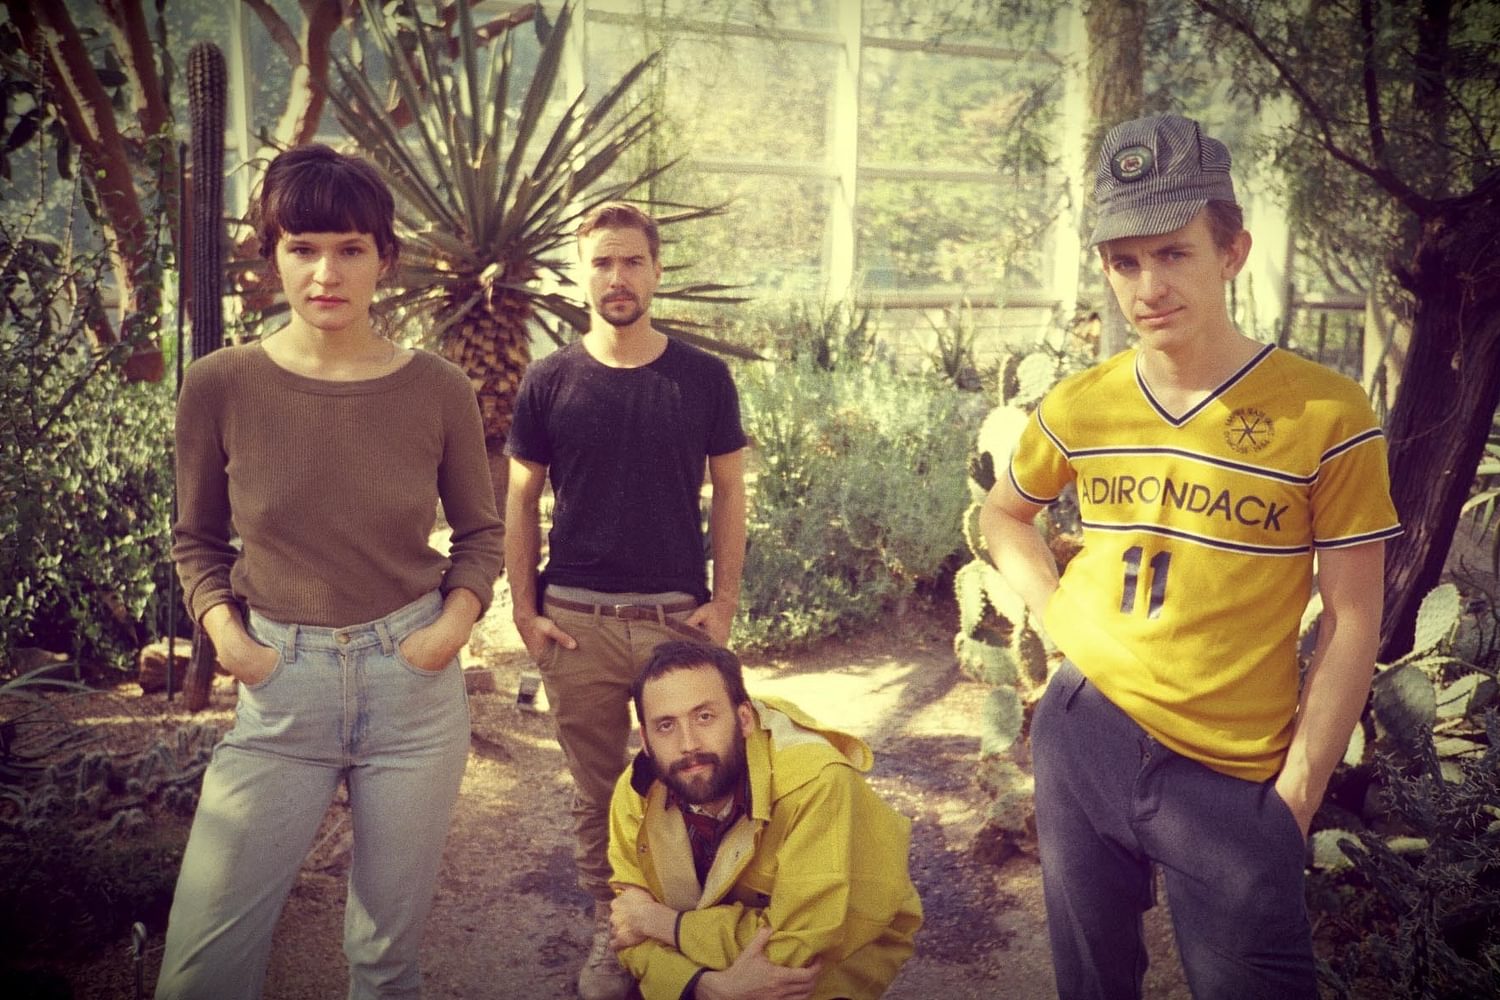 Big Thief have just announced a massive new London show for 2020